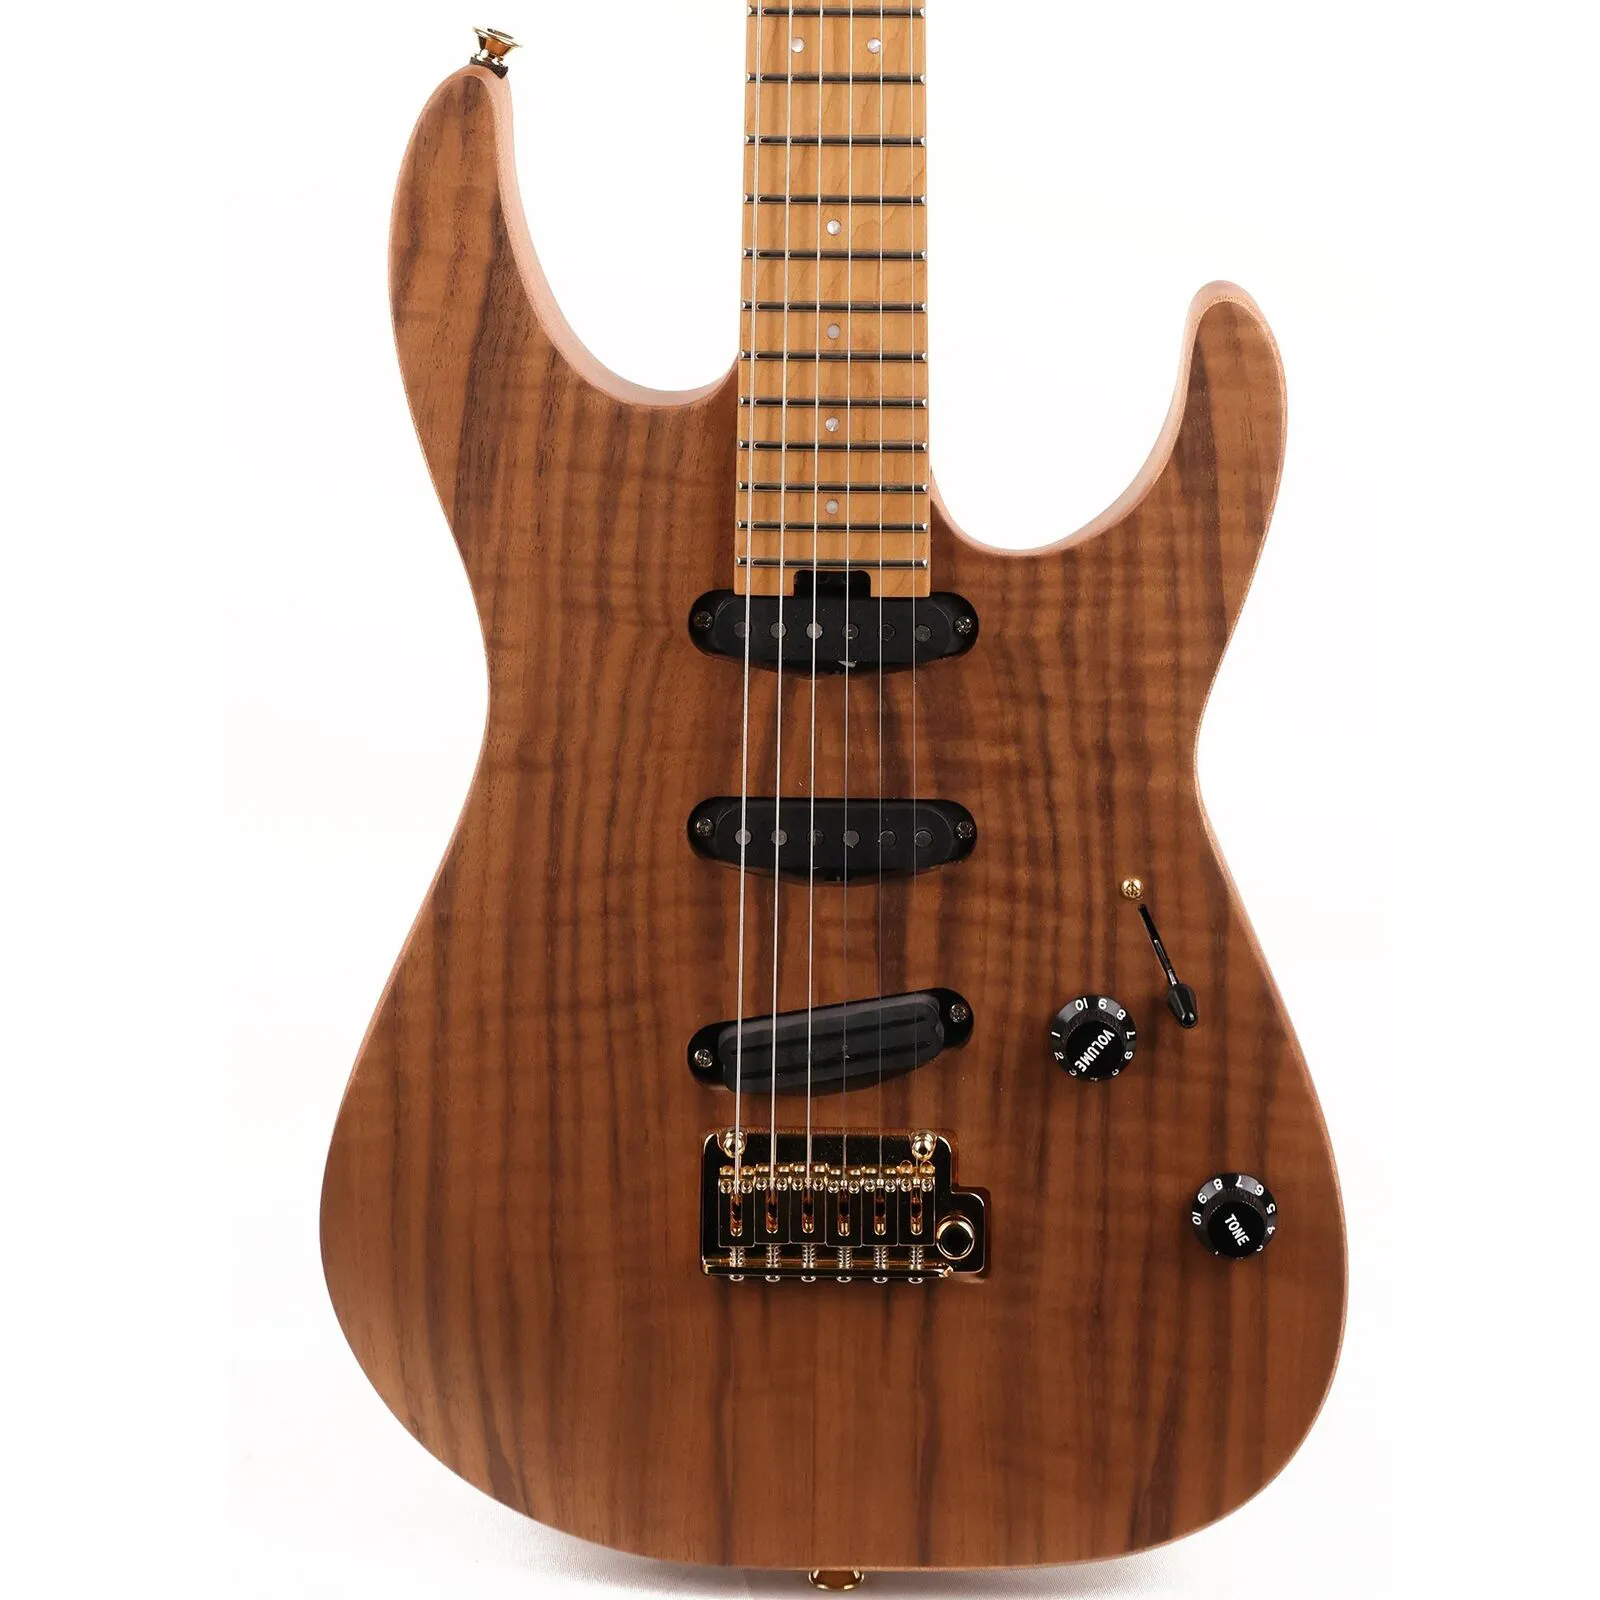 Ch arvel Pro-Mod DK22 SSS 2PT CM Mahogany with Walnut Natural Electric Guitar as same of the pictures